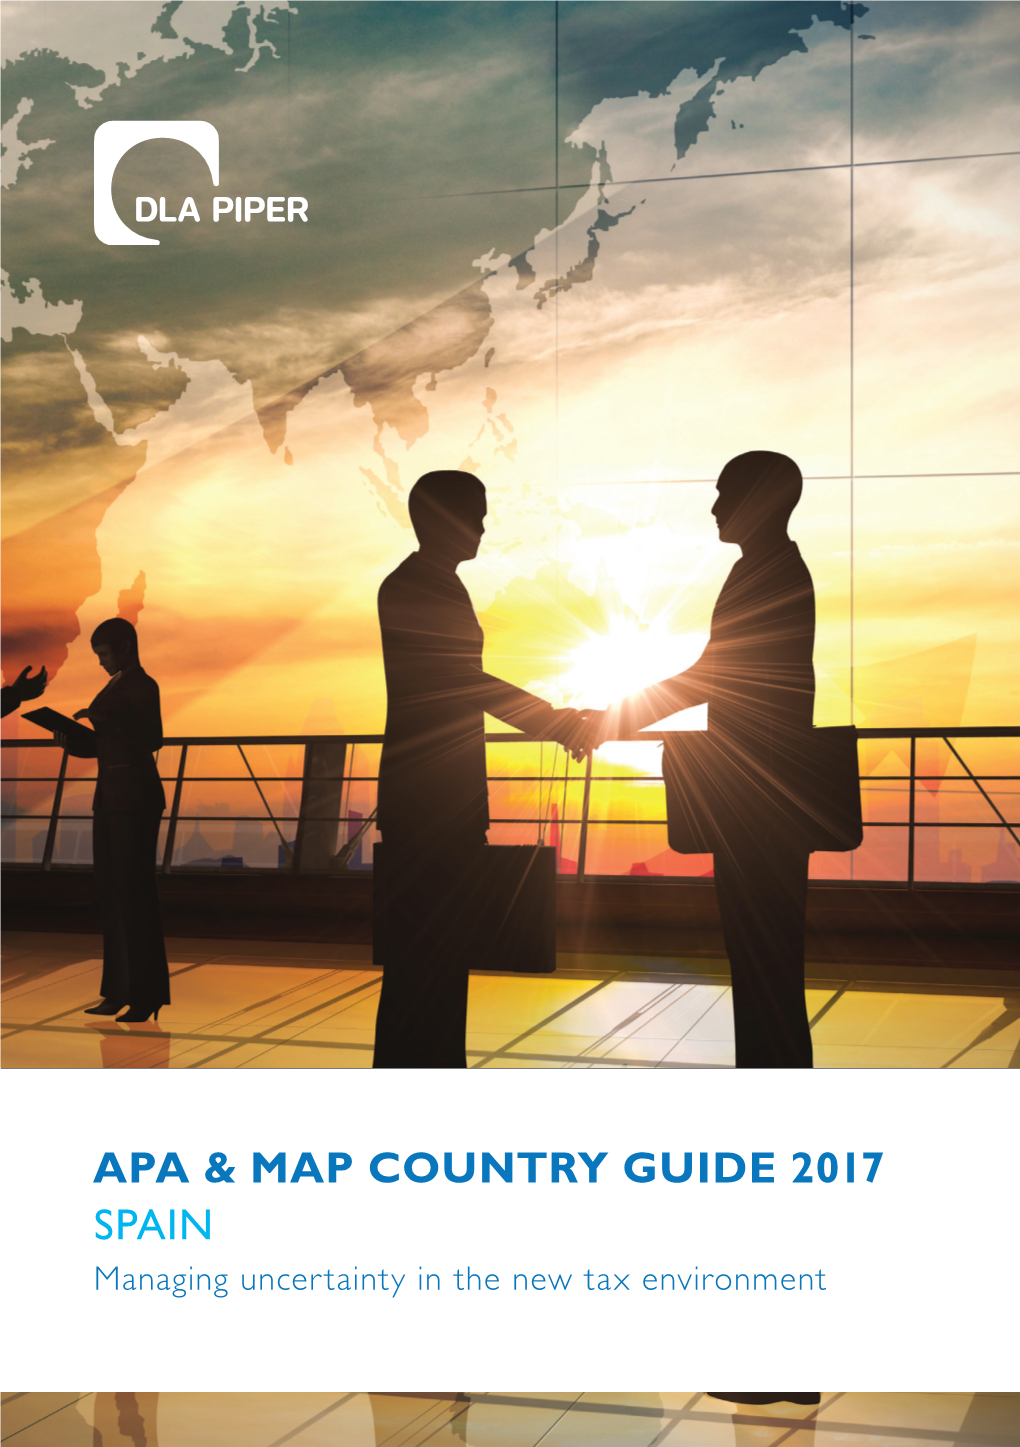 Apa & Map Country Guide 2017 Spain